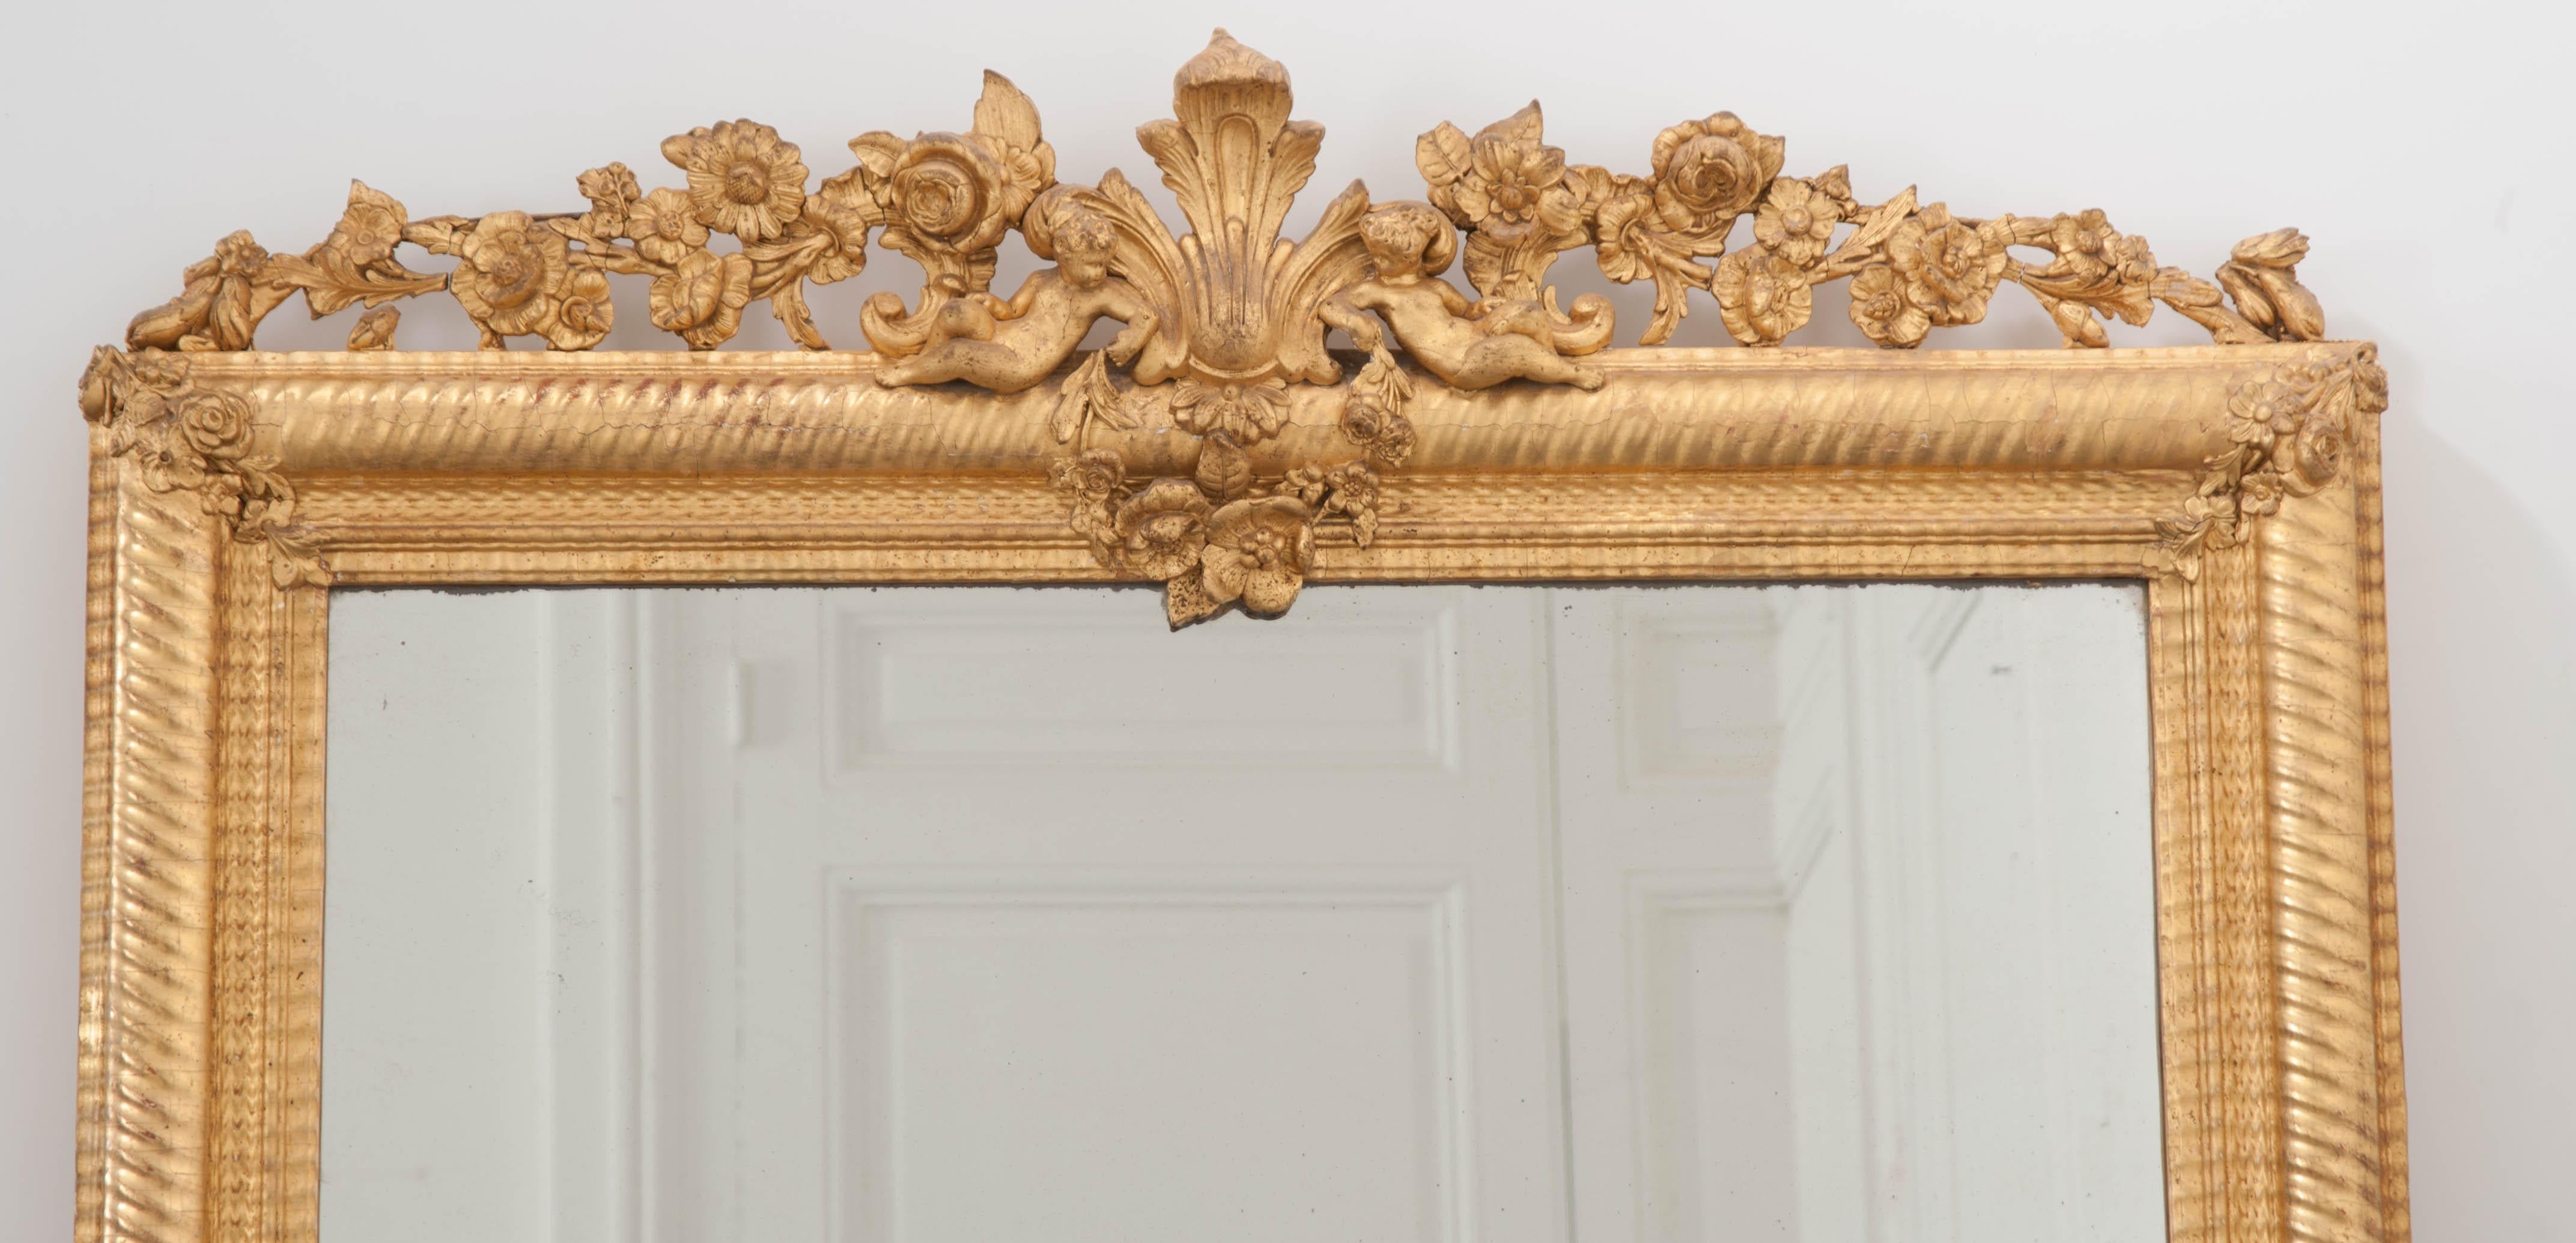 This beautiful gilded over mantel mirror, in the Louis XVI style, is from France, circa 1860. It features a delicate crest with central anthemion flanked by two cherubs among flowering vines which rests atop the wavy ribbed frame. The original